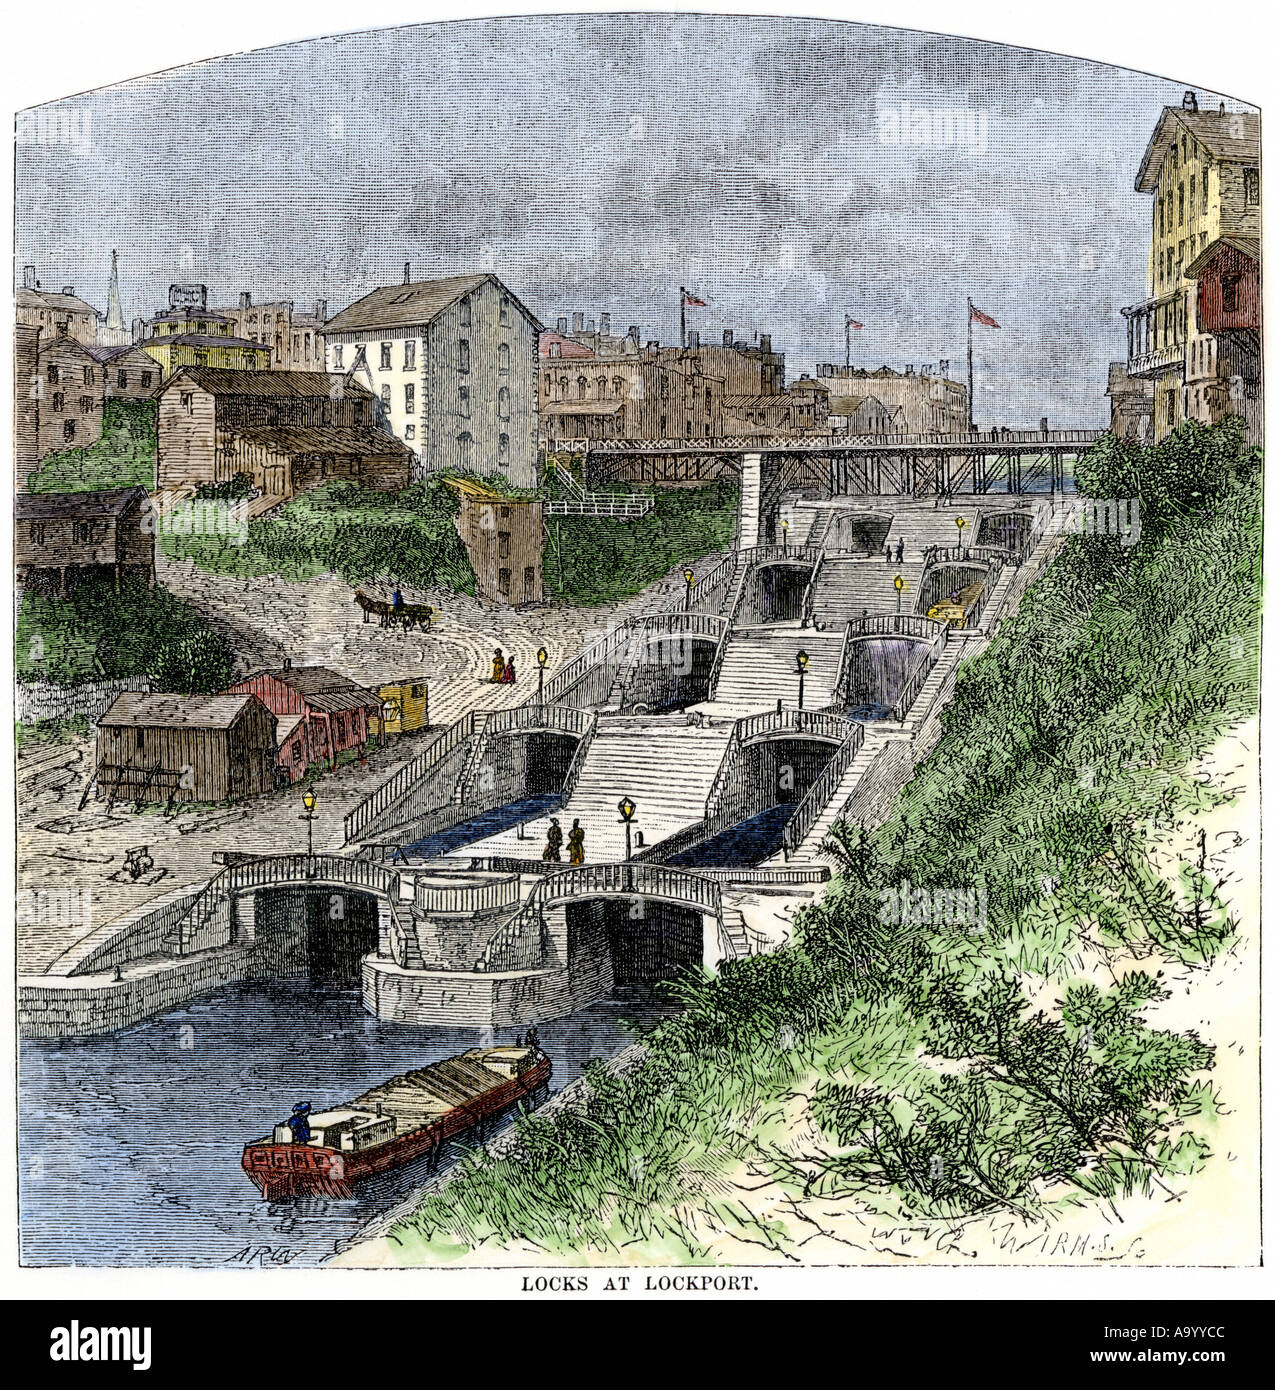 Erie Canal locks at Lockport New York 1870s. Hand-colored woodcut Stock Photo